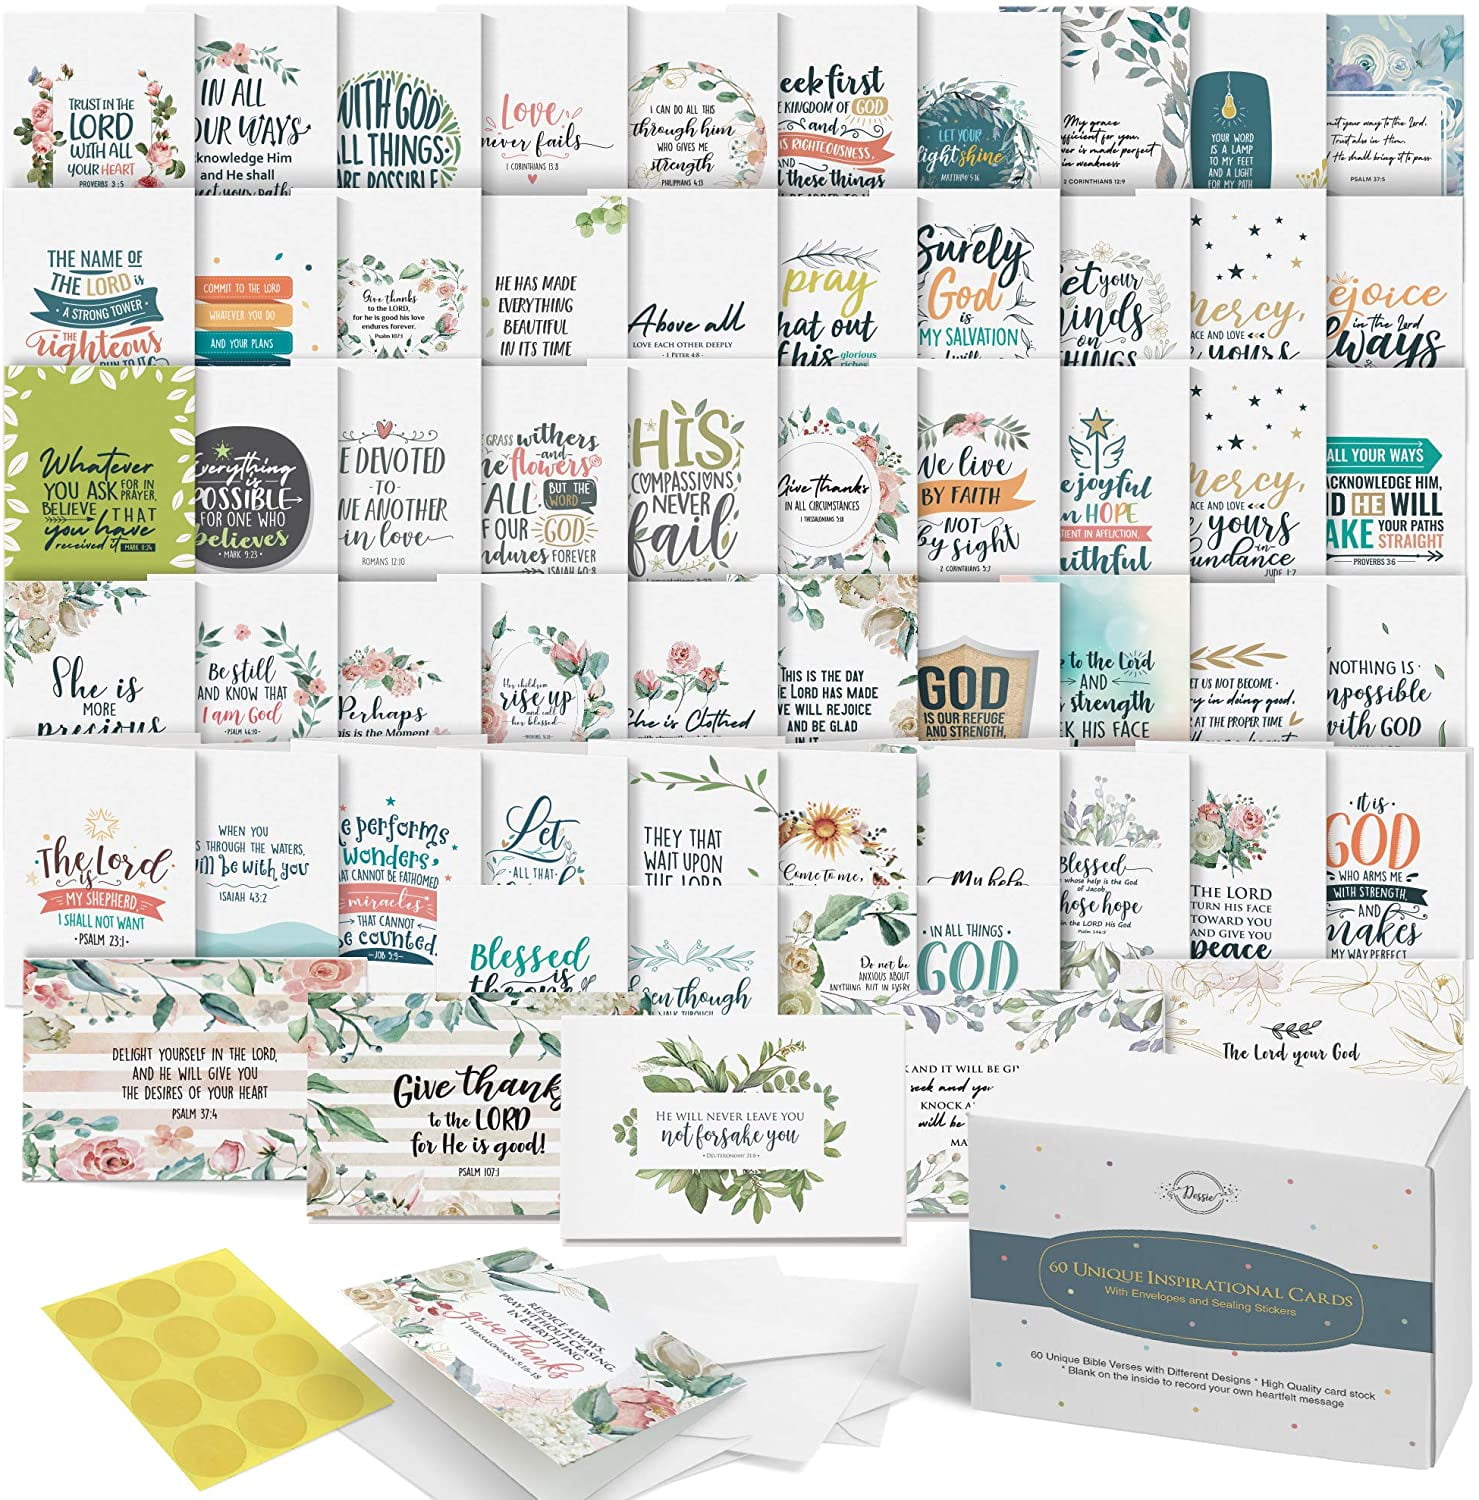 Bible Verses Quality Pack of 10 NEW Miniature Postcards Notecards 3.5 x 5 inch 